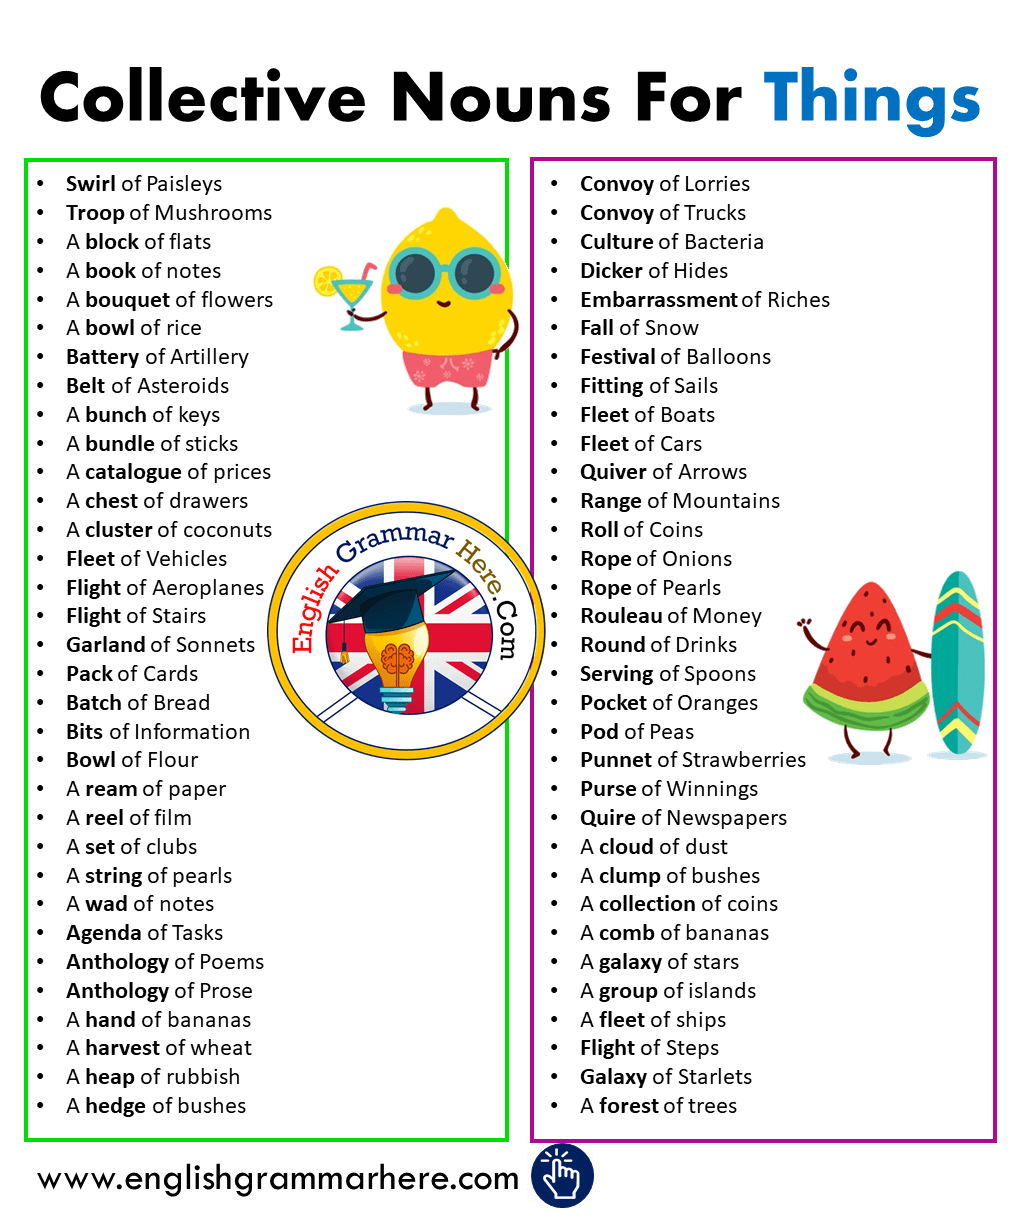 Collective Nouns For Things in English